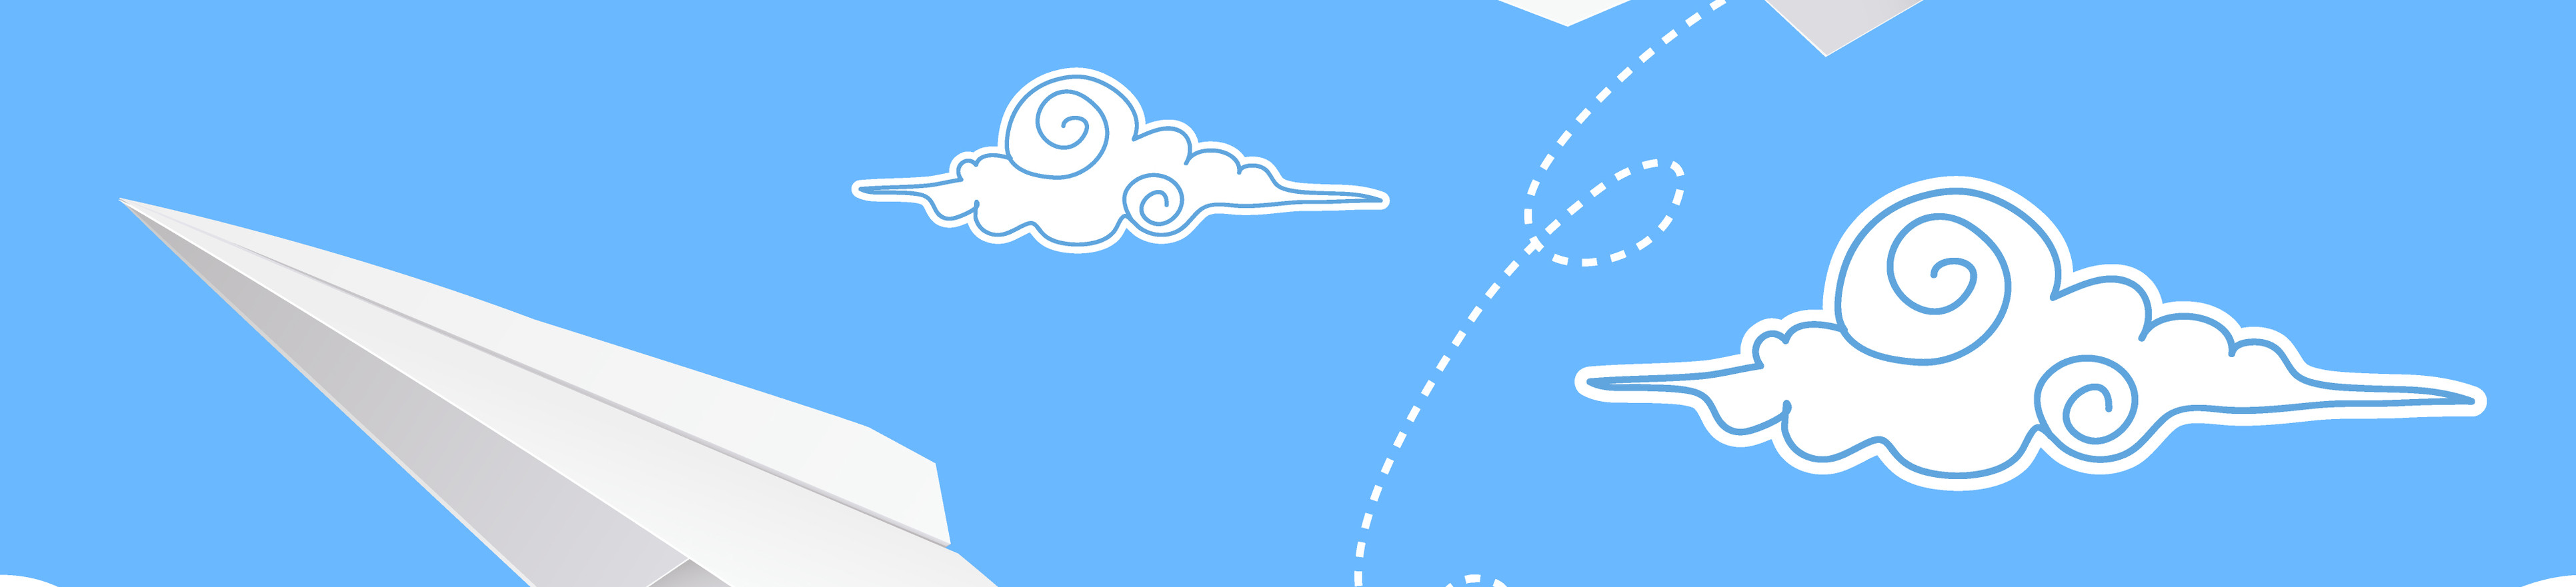 Clouds and paper airplane cartoon